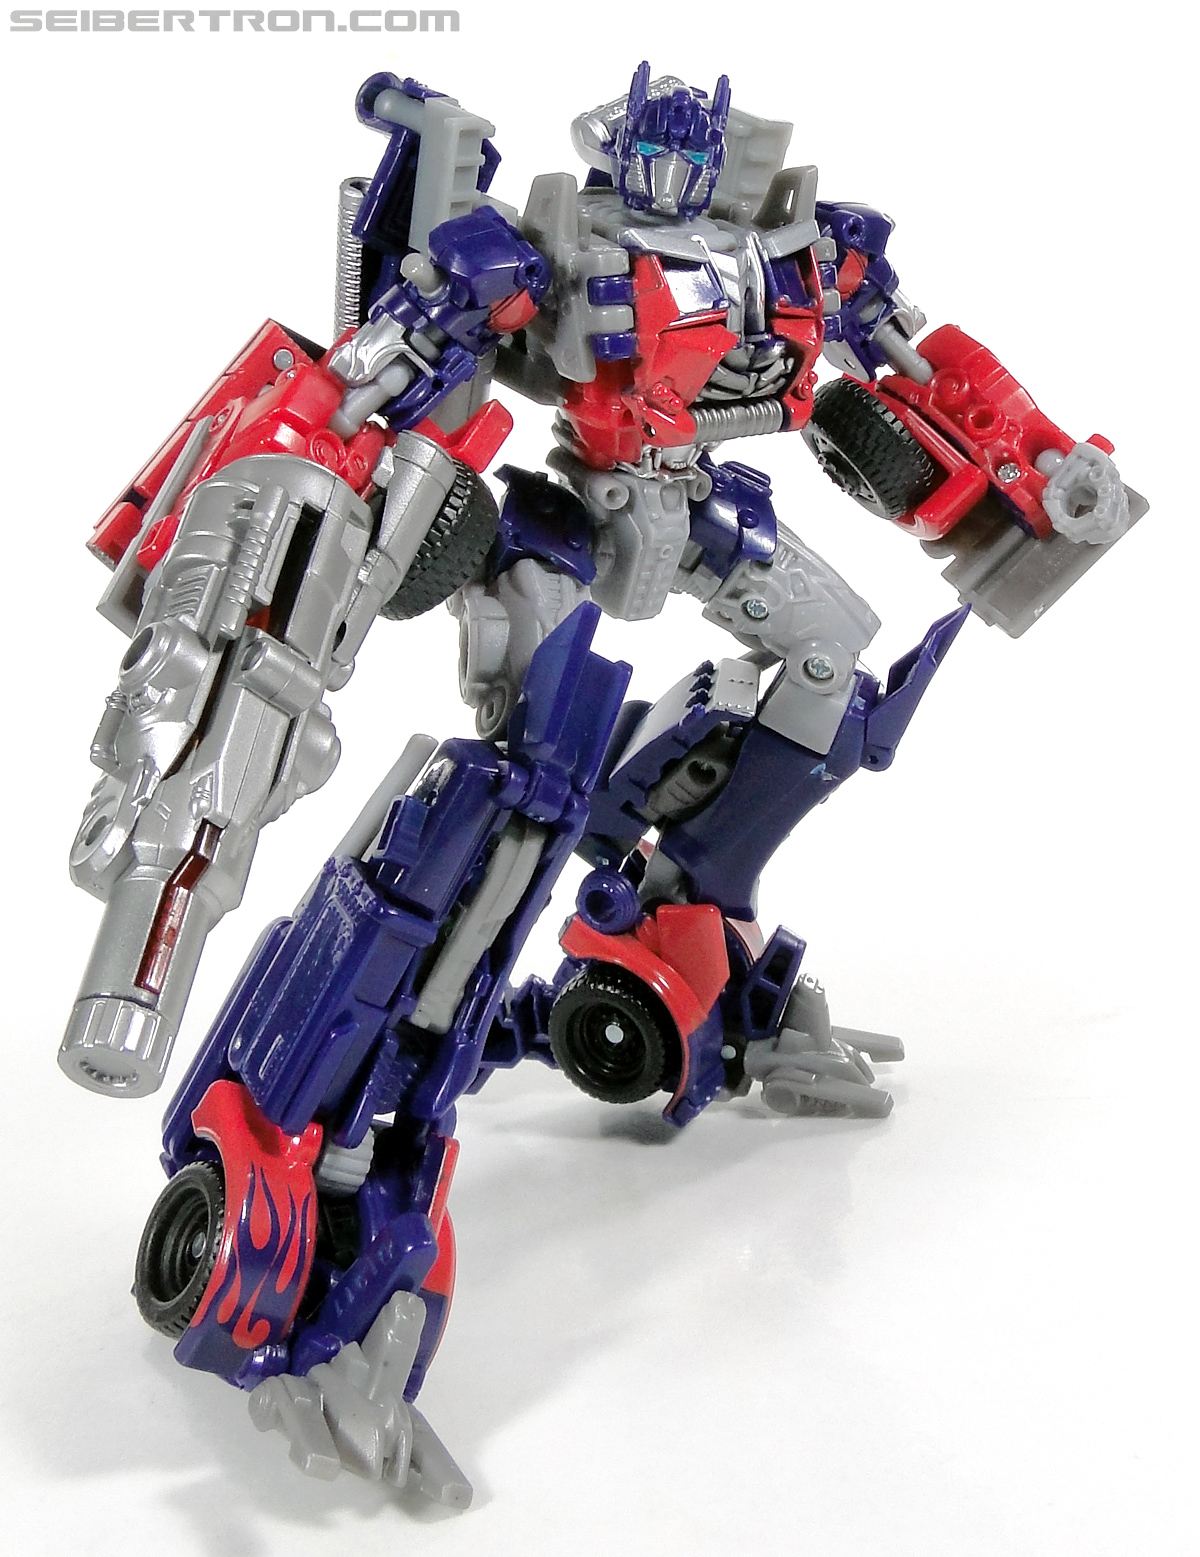 Transformers Dark of the Moon Optimus Prime with Mechtech Trailer (Image #168 of 248)